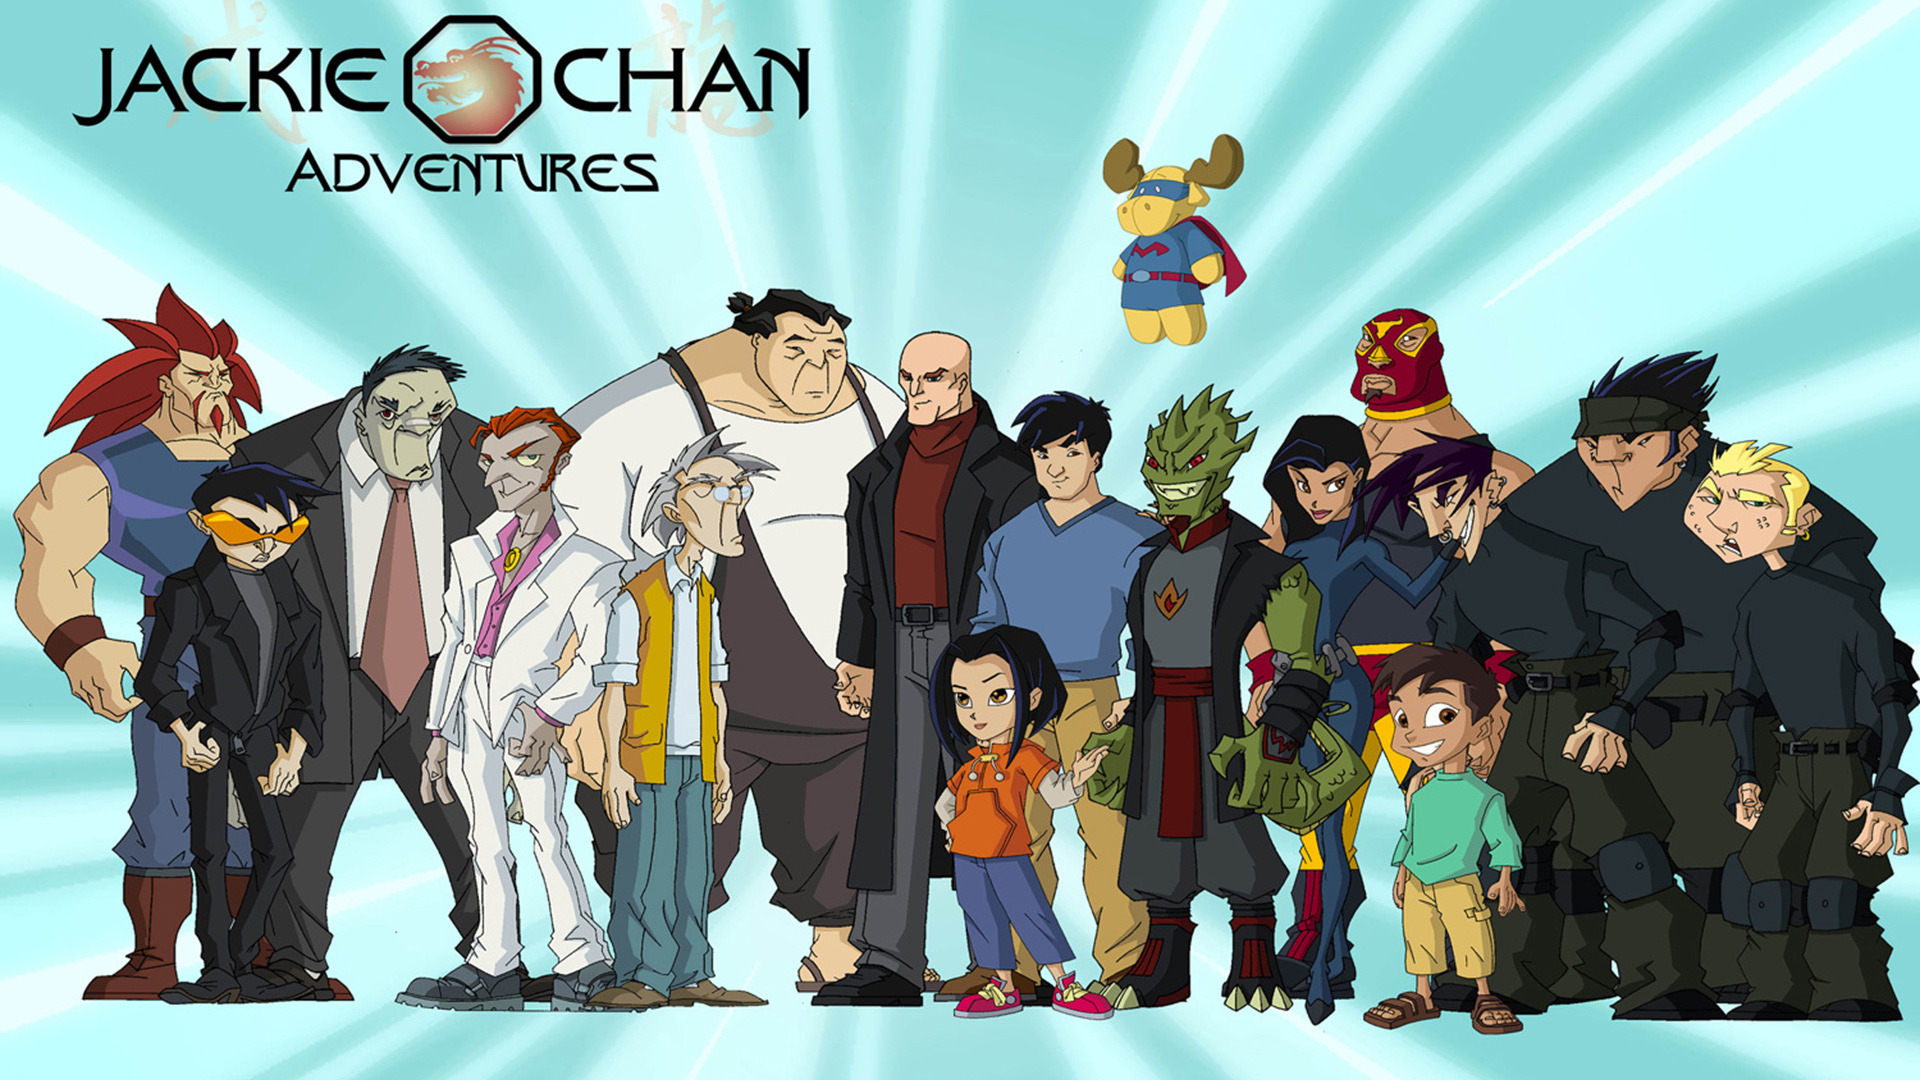 Show Jackie Chan Adventures